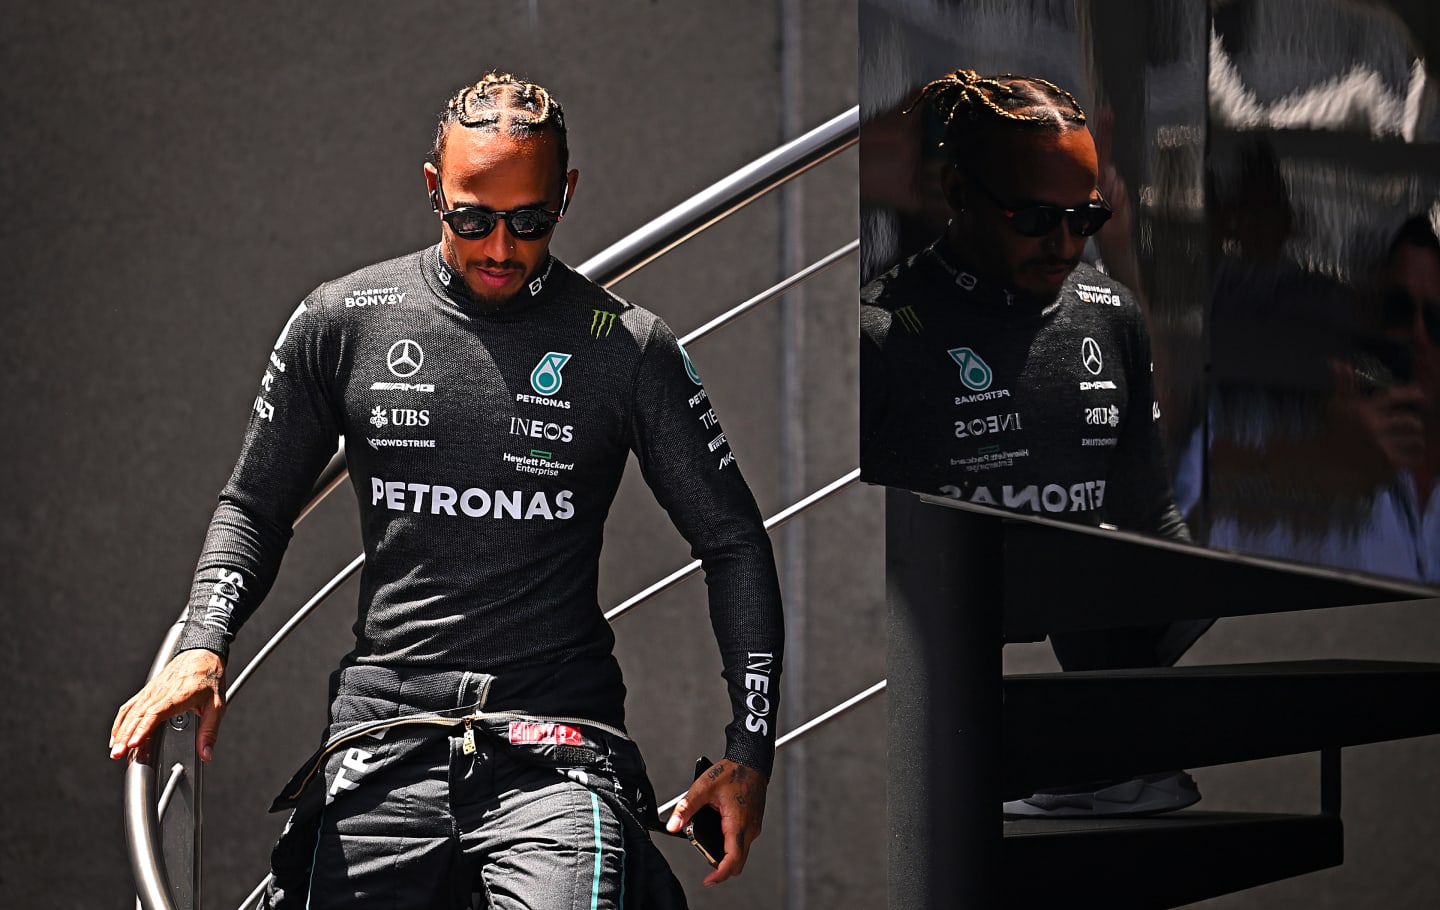 BARCELONA, SPAIN - MAY 21: Lewis Hamilton of Great Britain and Mercedes walks in the Paddock during